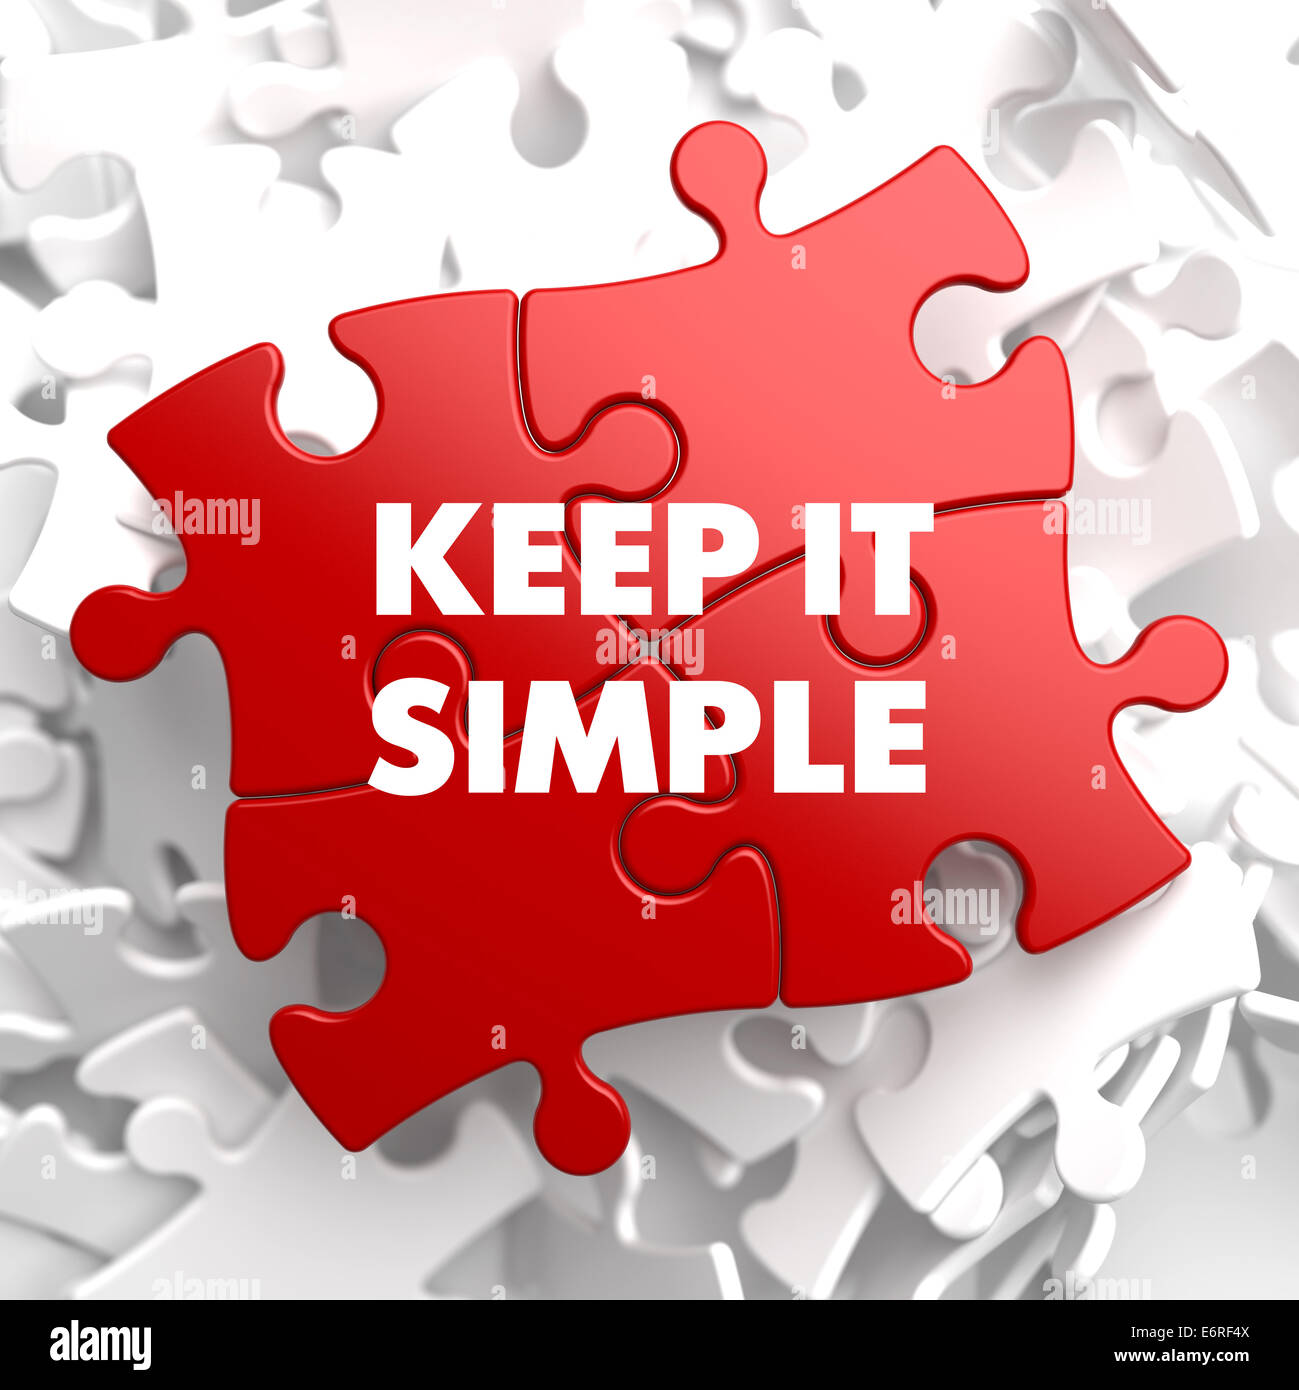 Keep it Simple on Red Puzzle. Stock Photo